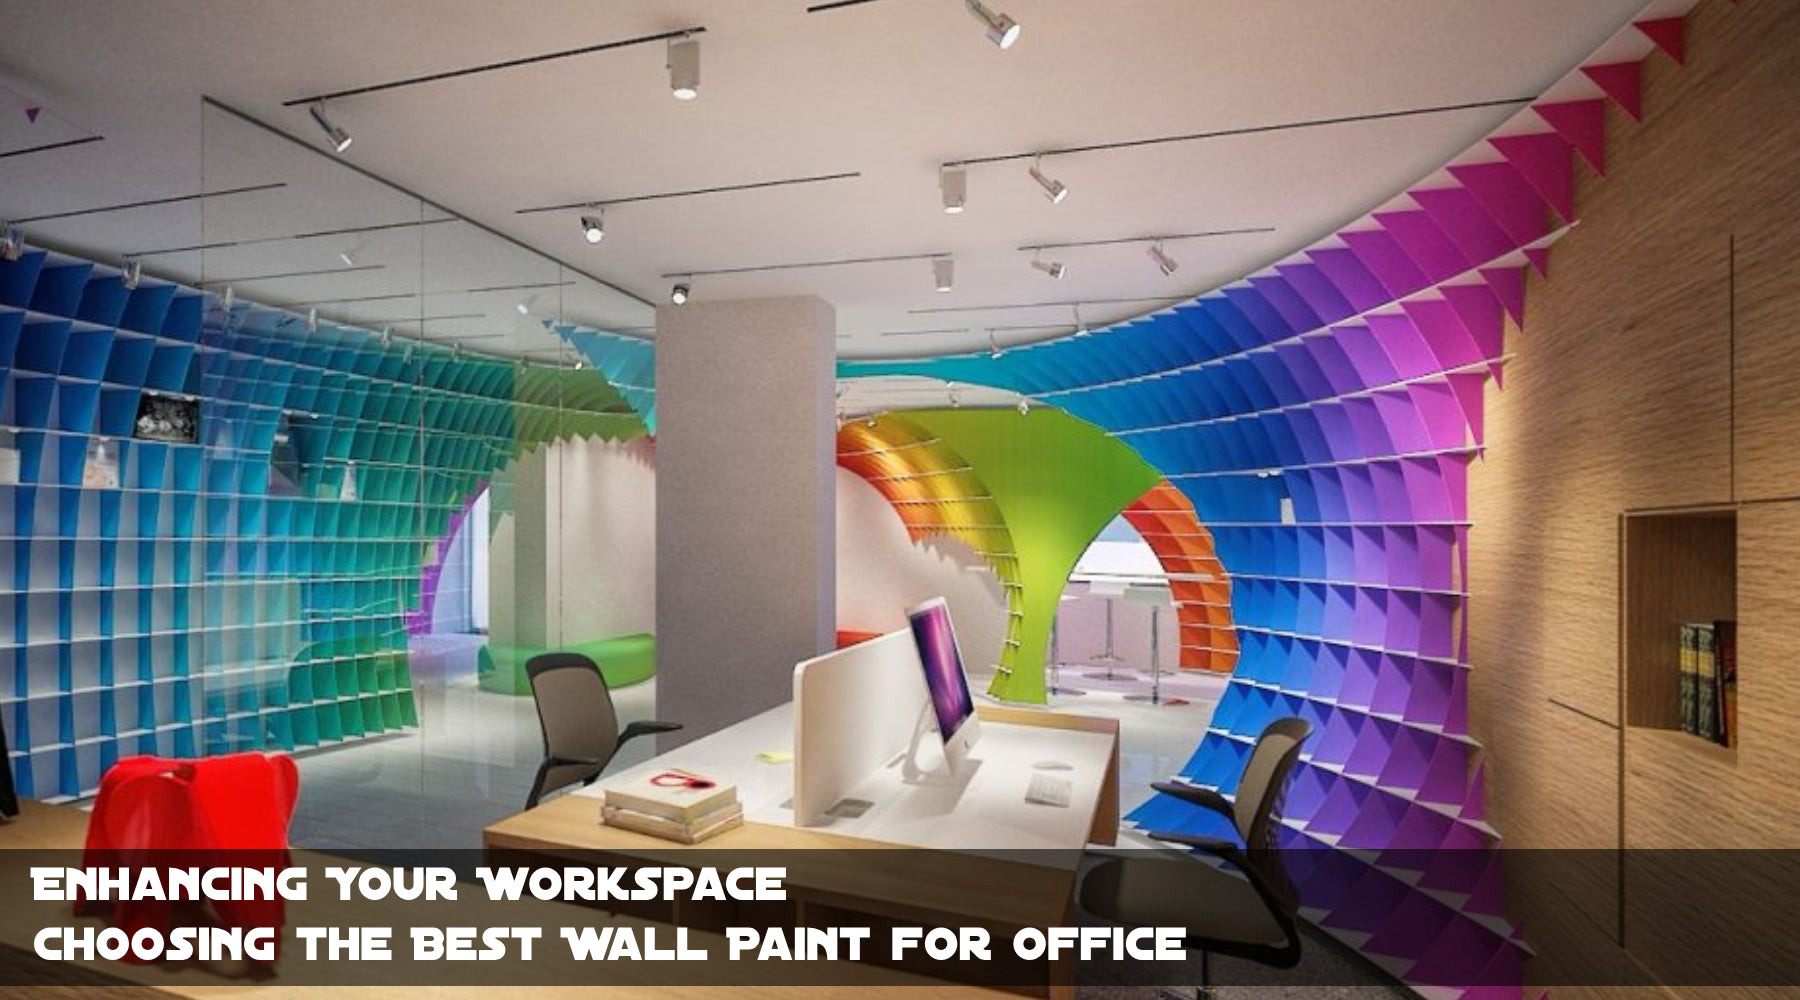 Enhancing Your Workspace: Choosing the Best Wall Paint for Office